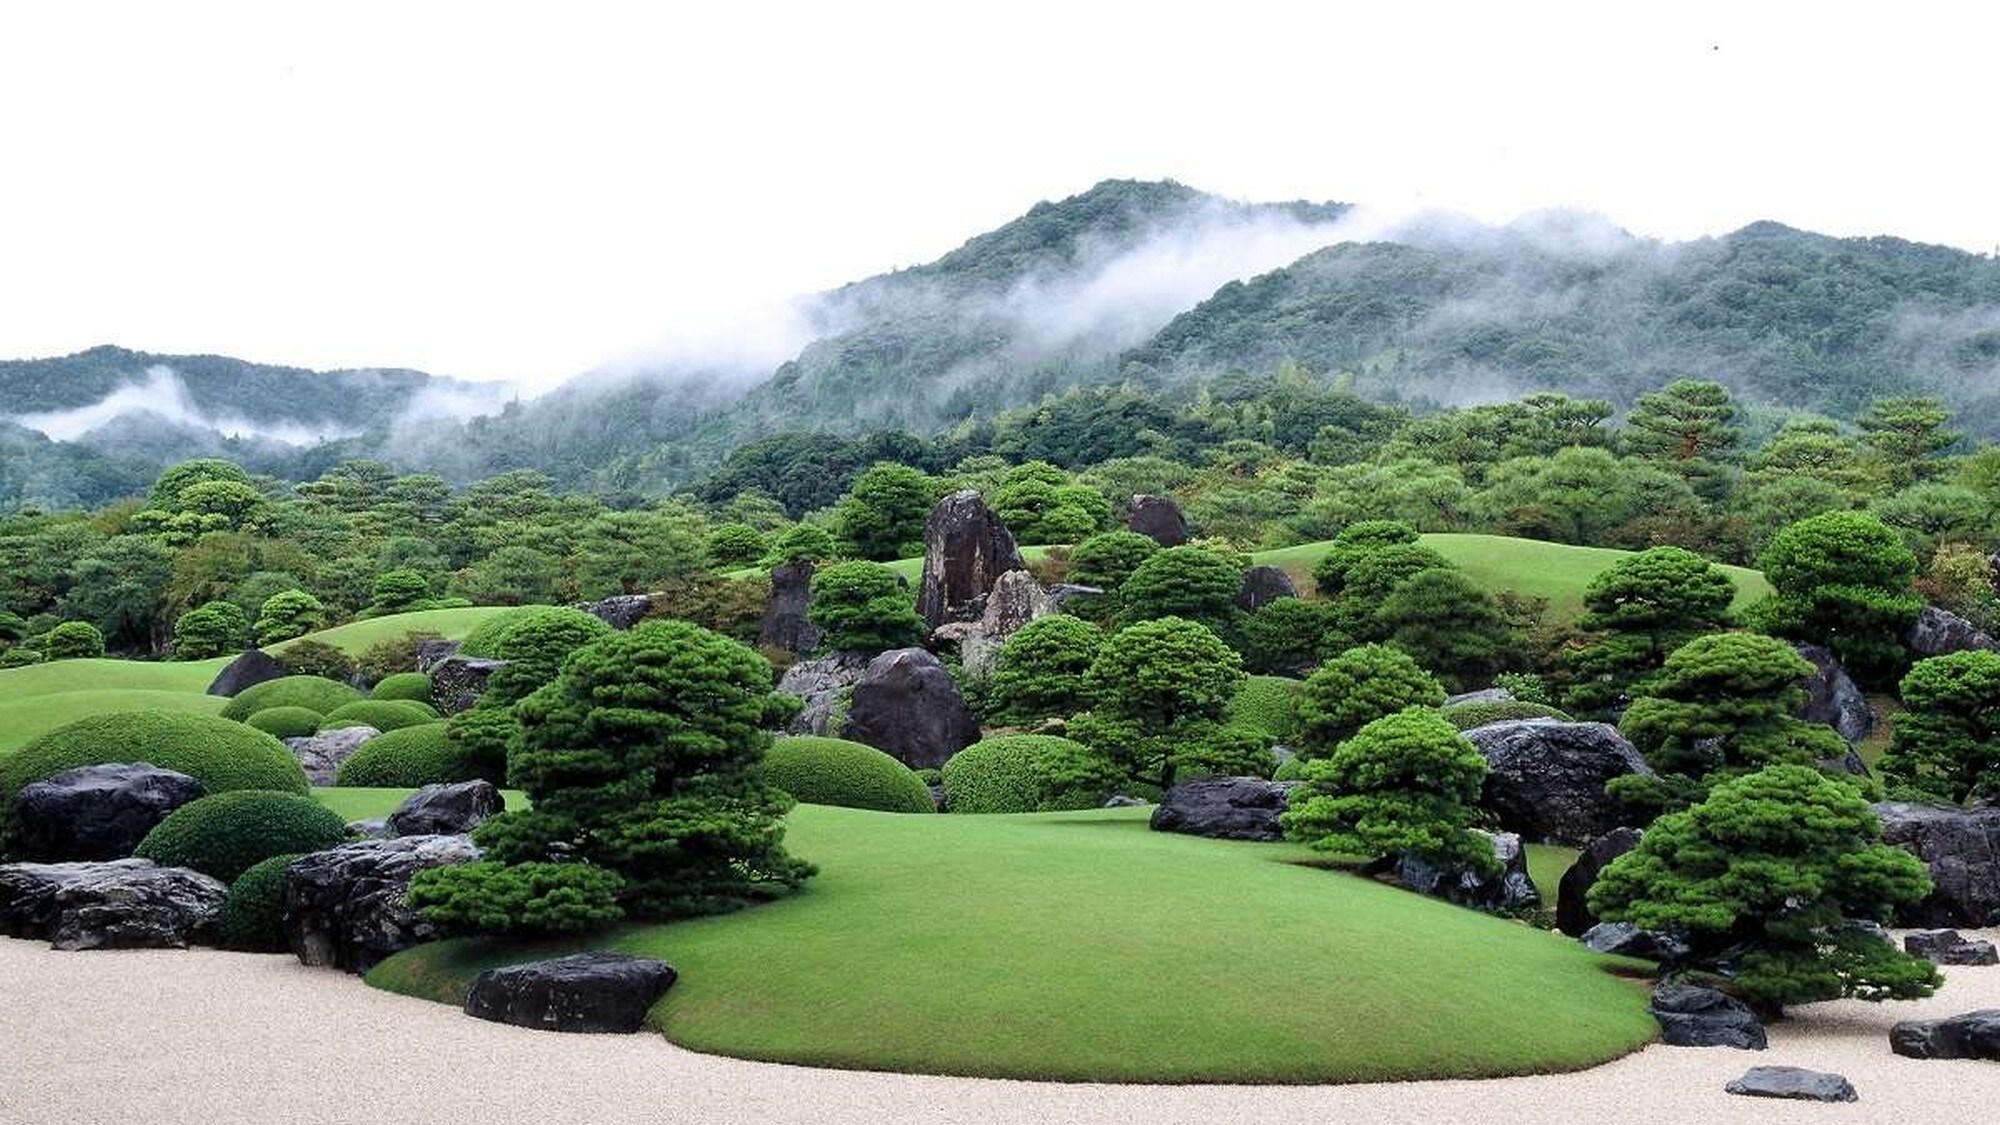 [Adachi Museum of Art] The collection of Yokoyama Taikan is abundant. The Japanese garden, which has been selected as the best in the world for 10 consecutive years, is also a highlight.